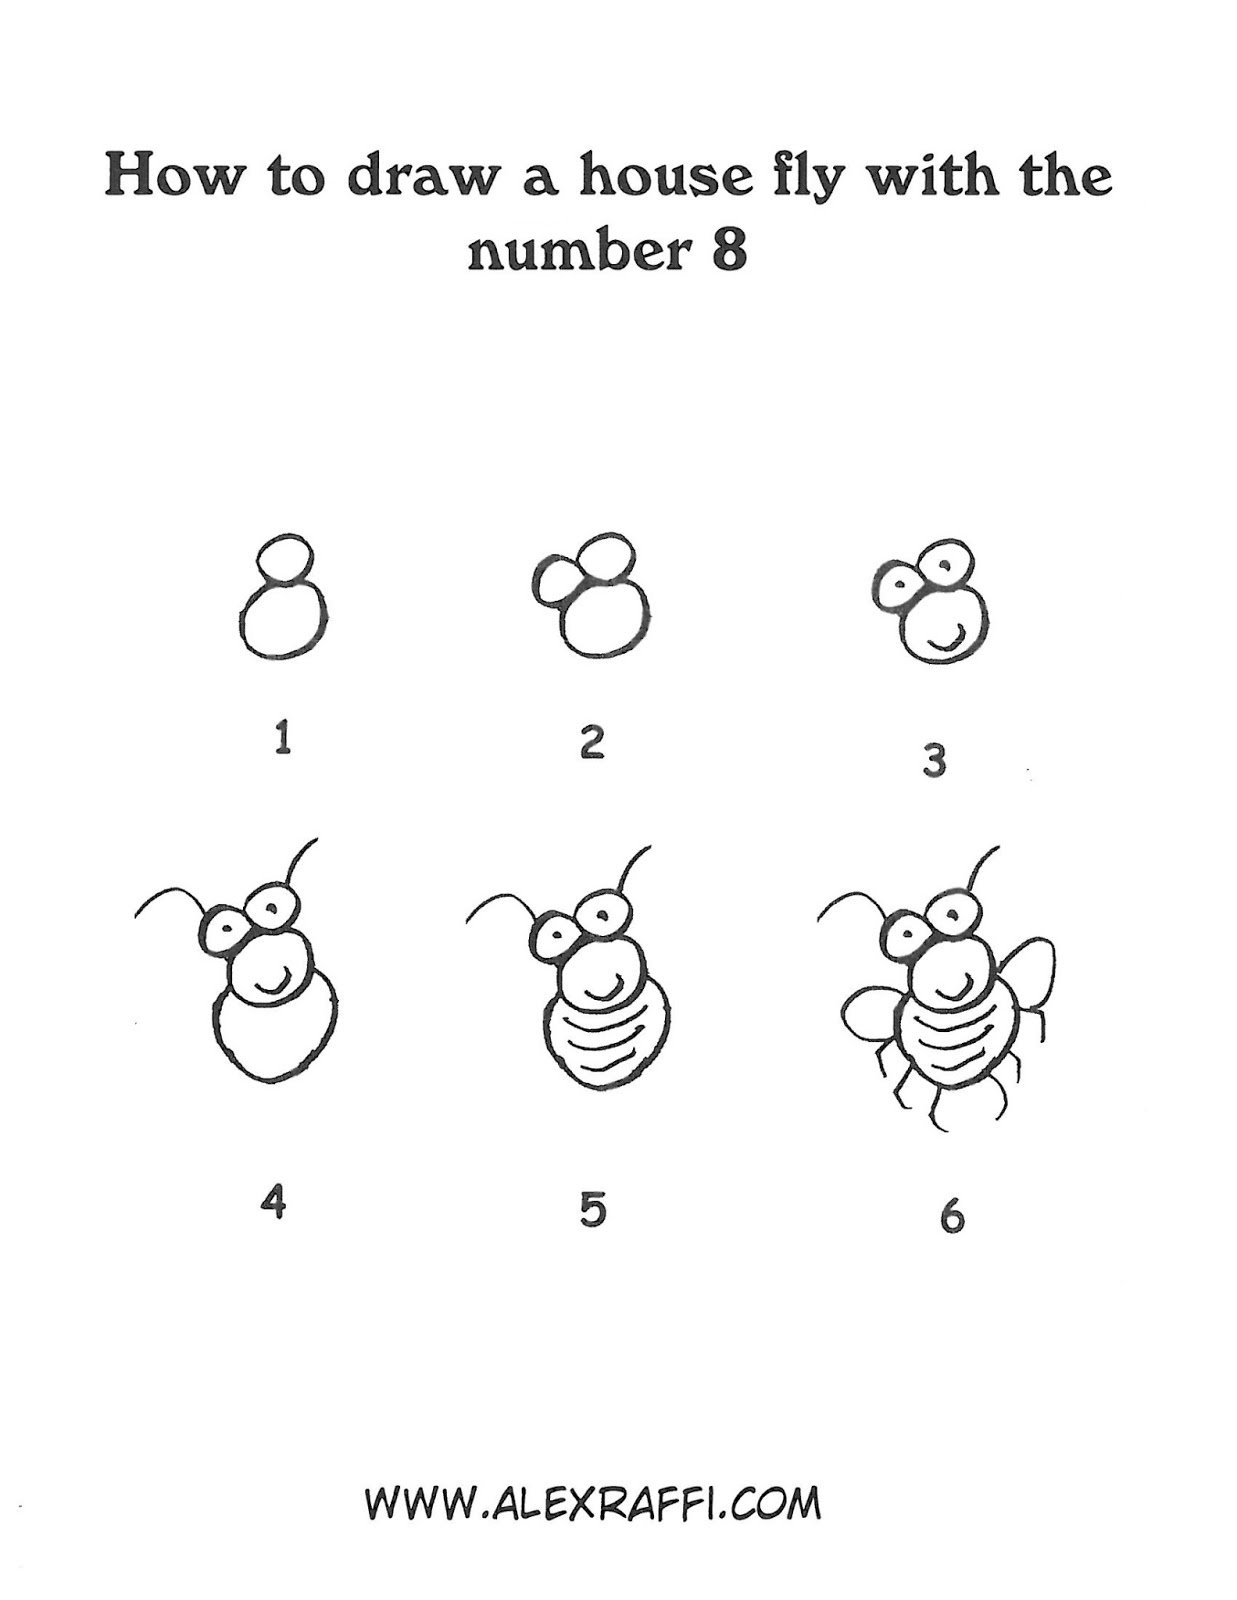 Alex Raffi Blog: Drawing with numbers